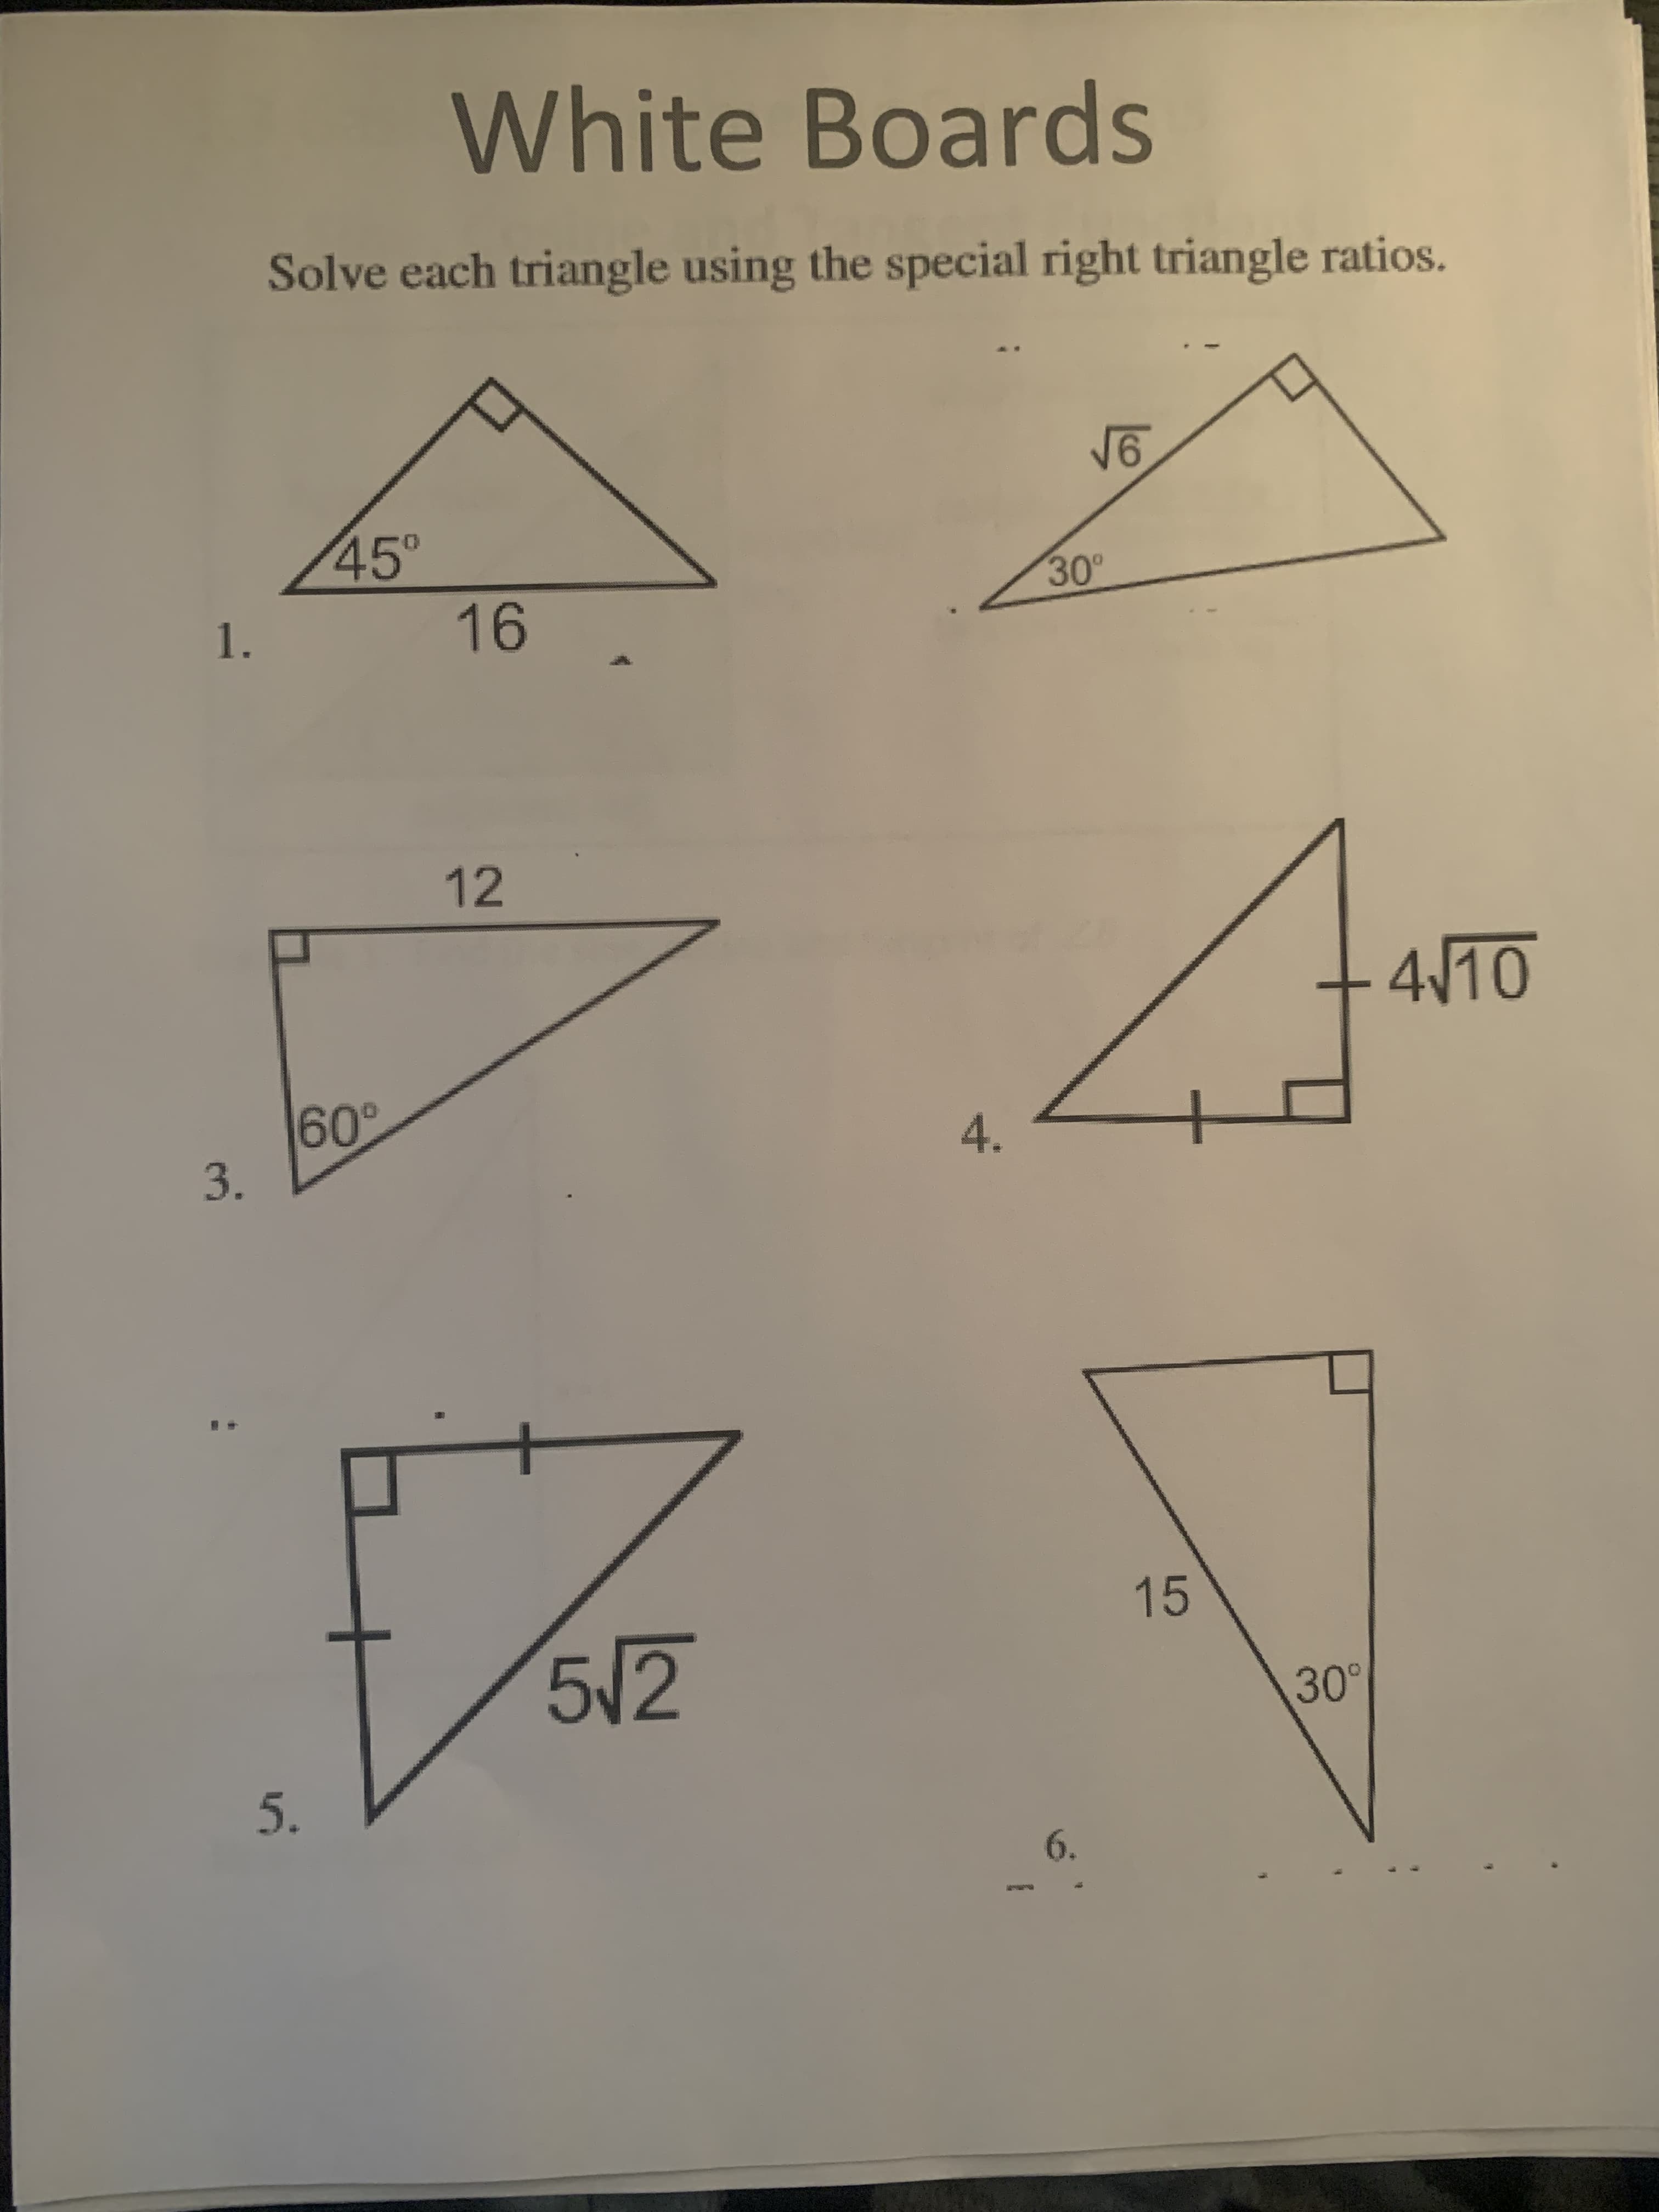 Solve each triangle using the special right triangle ratios.
V6
45°
30°
1.
16
12
4/10
60°
3.
4.
15
5/2
30
6.
5.
